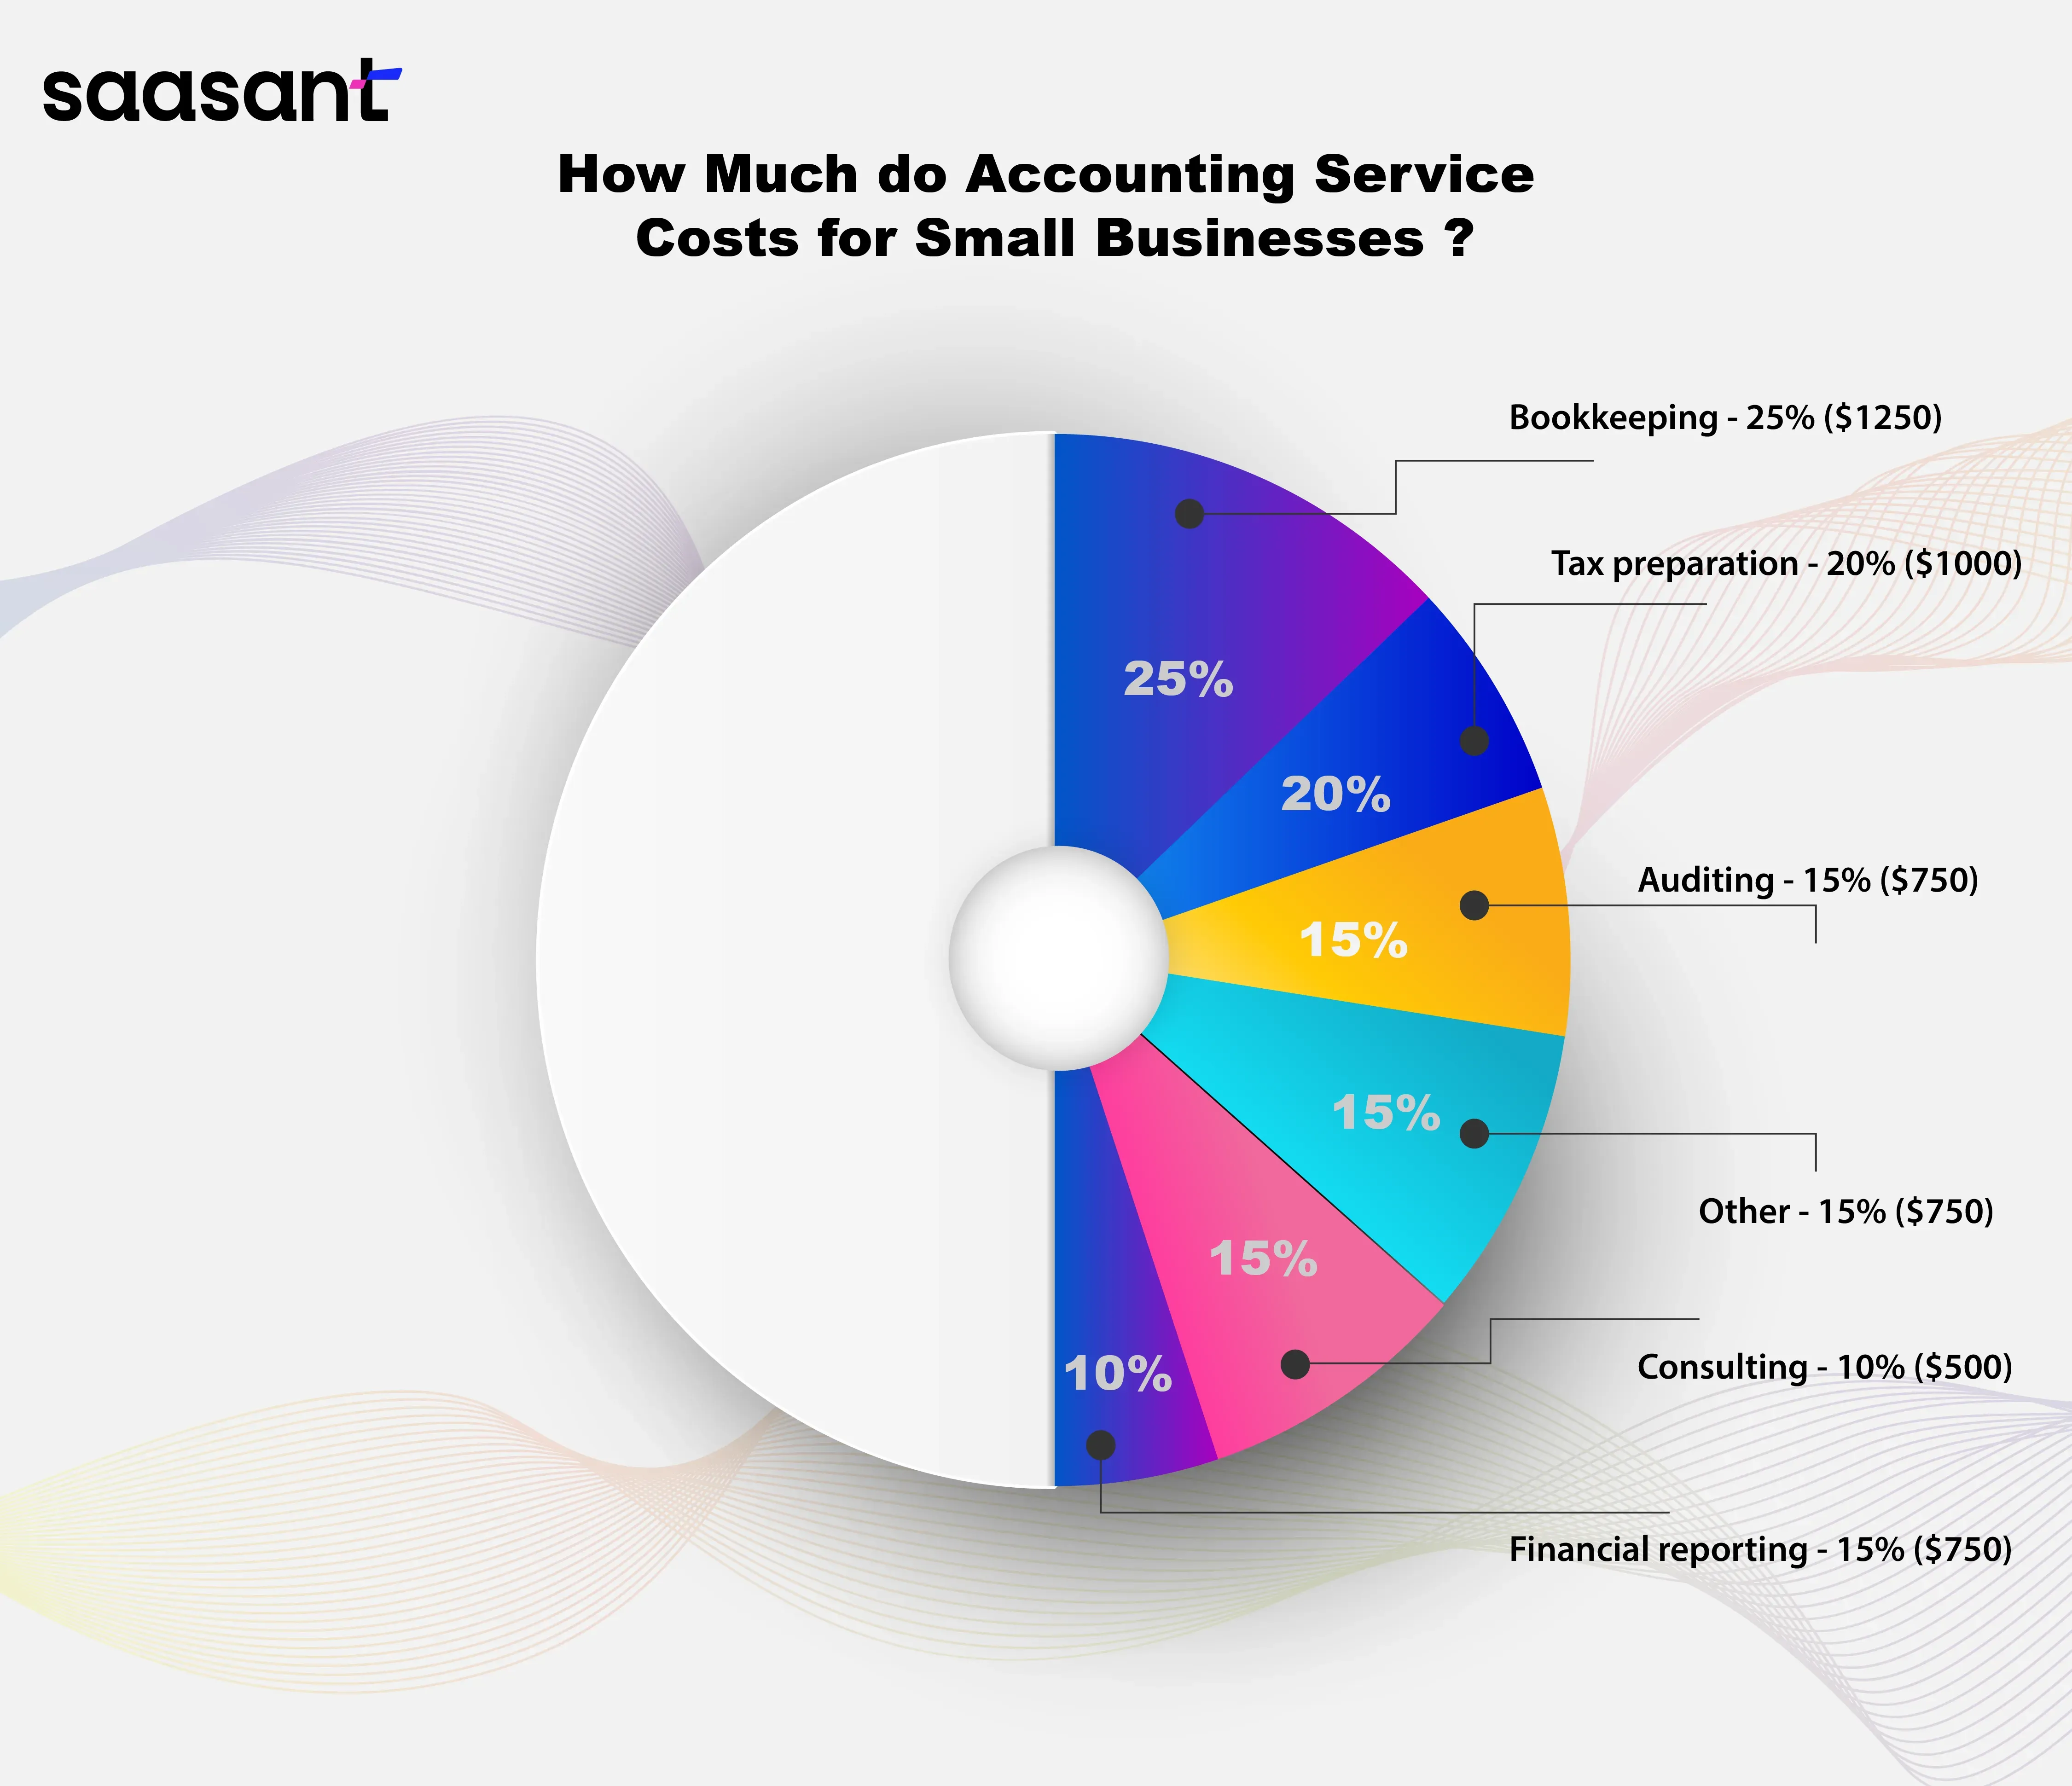 How much do Accounting Service Costs for Small Businesses?